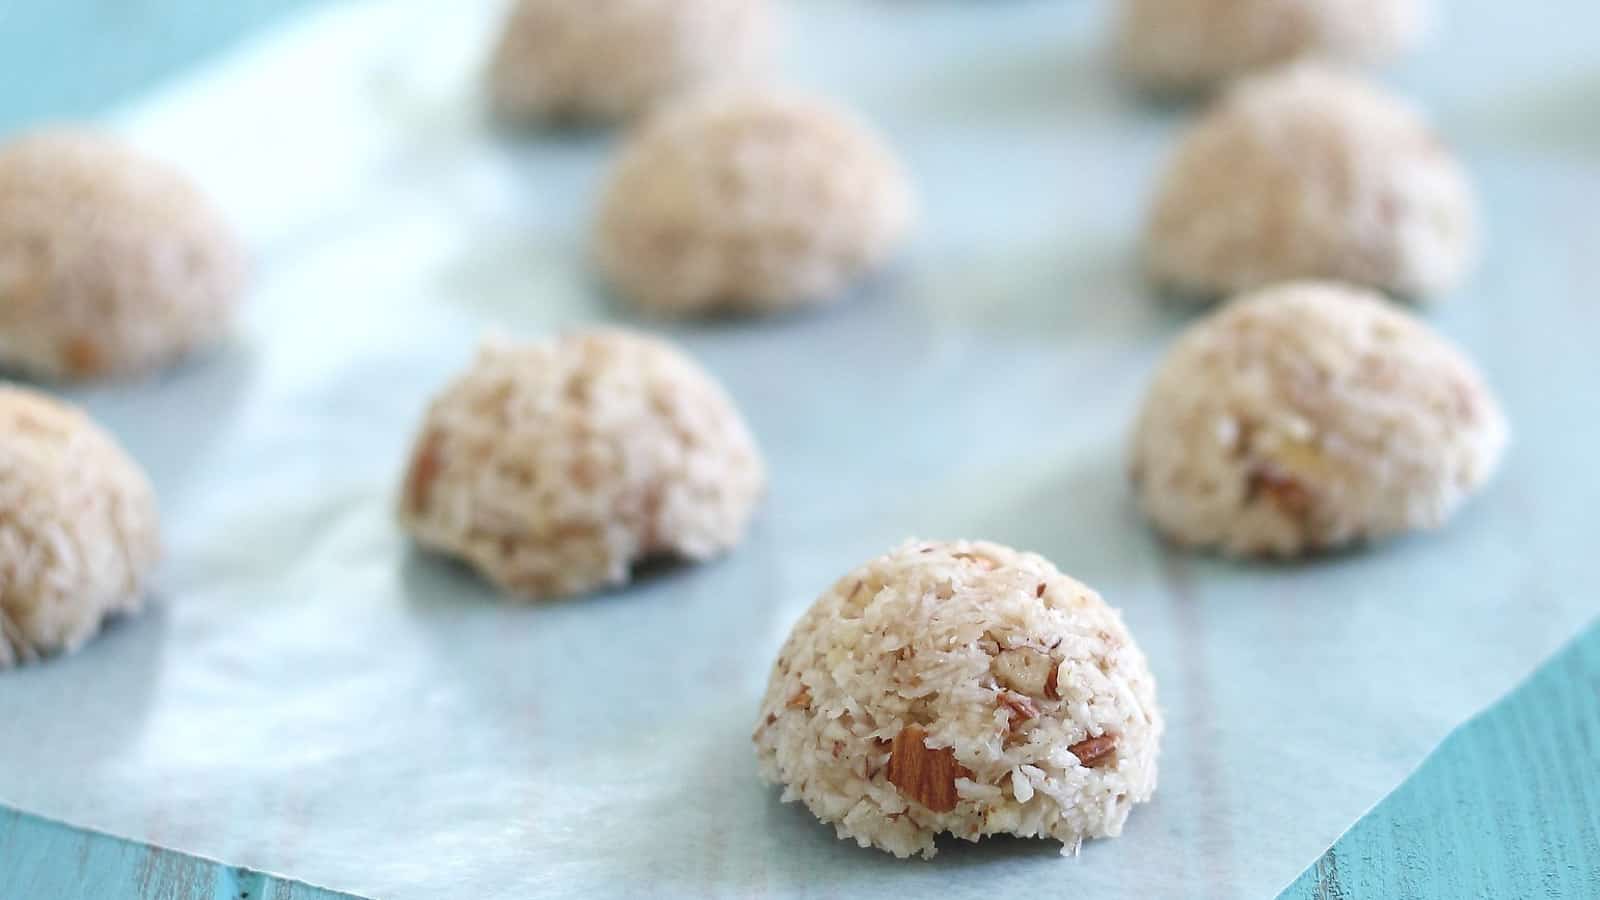 Coconut almond macaroons on parchment paper.